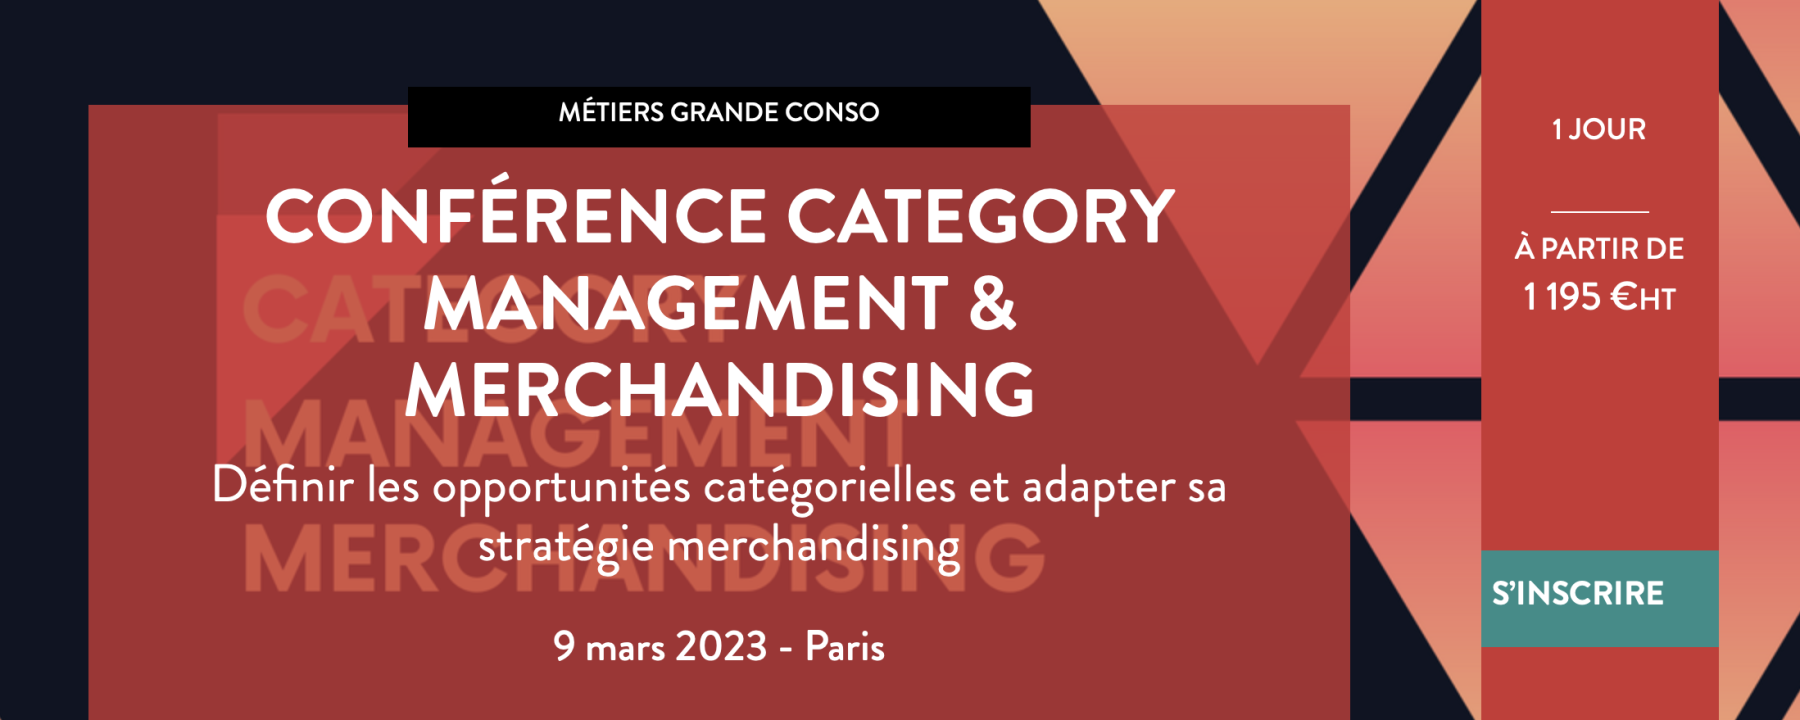 Conférence category Management & Merchandising